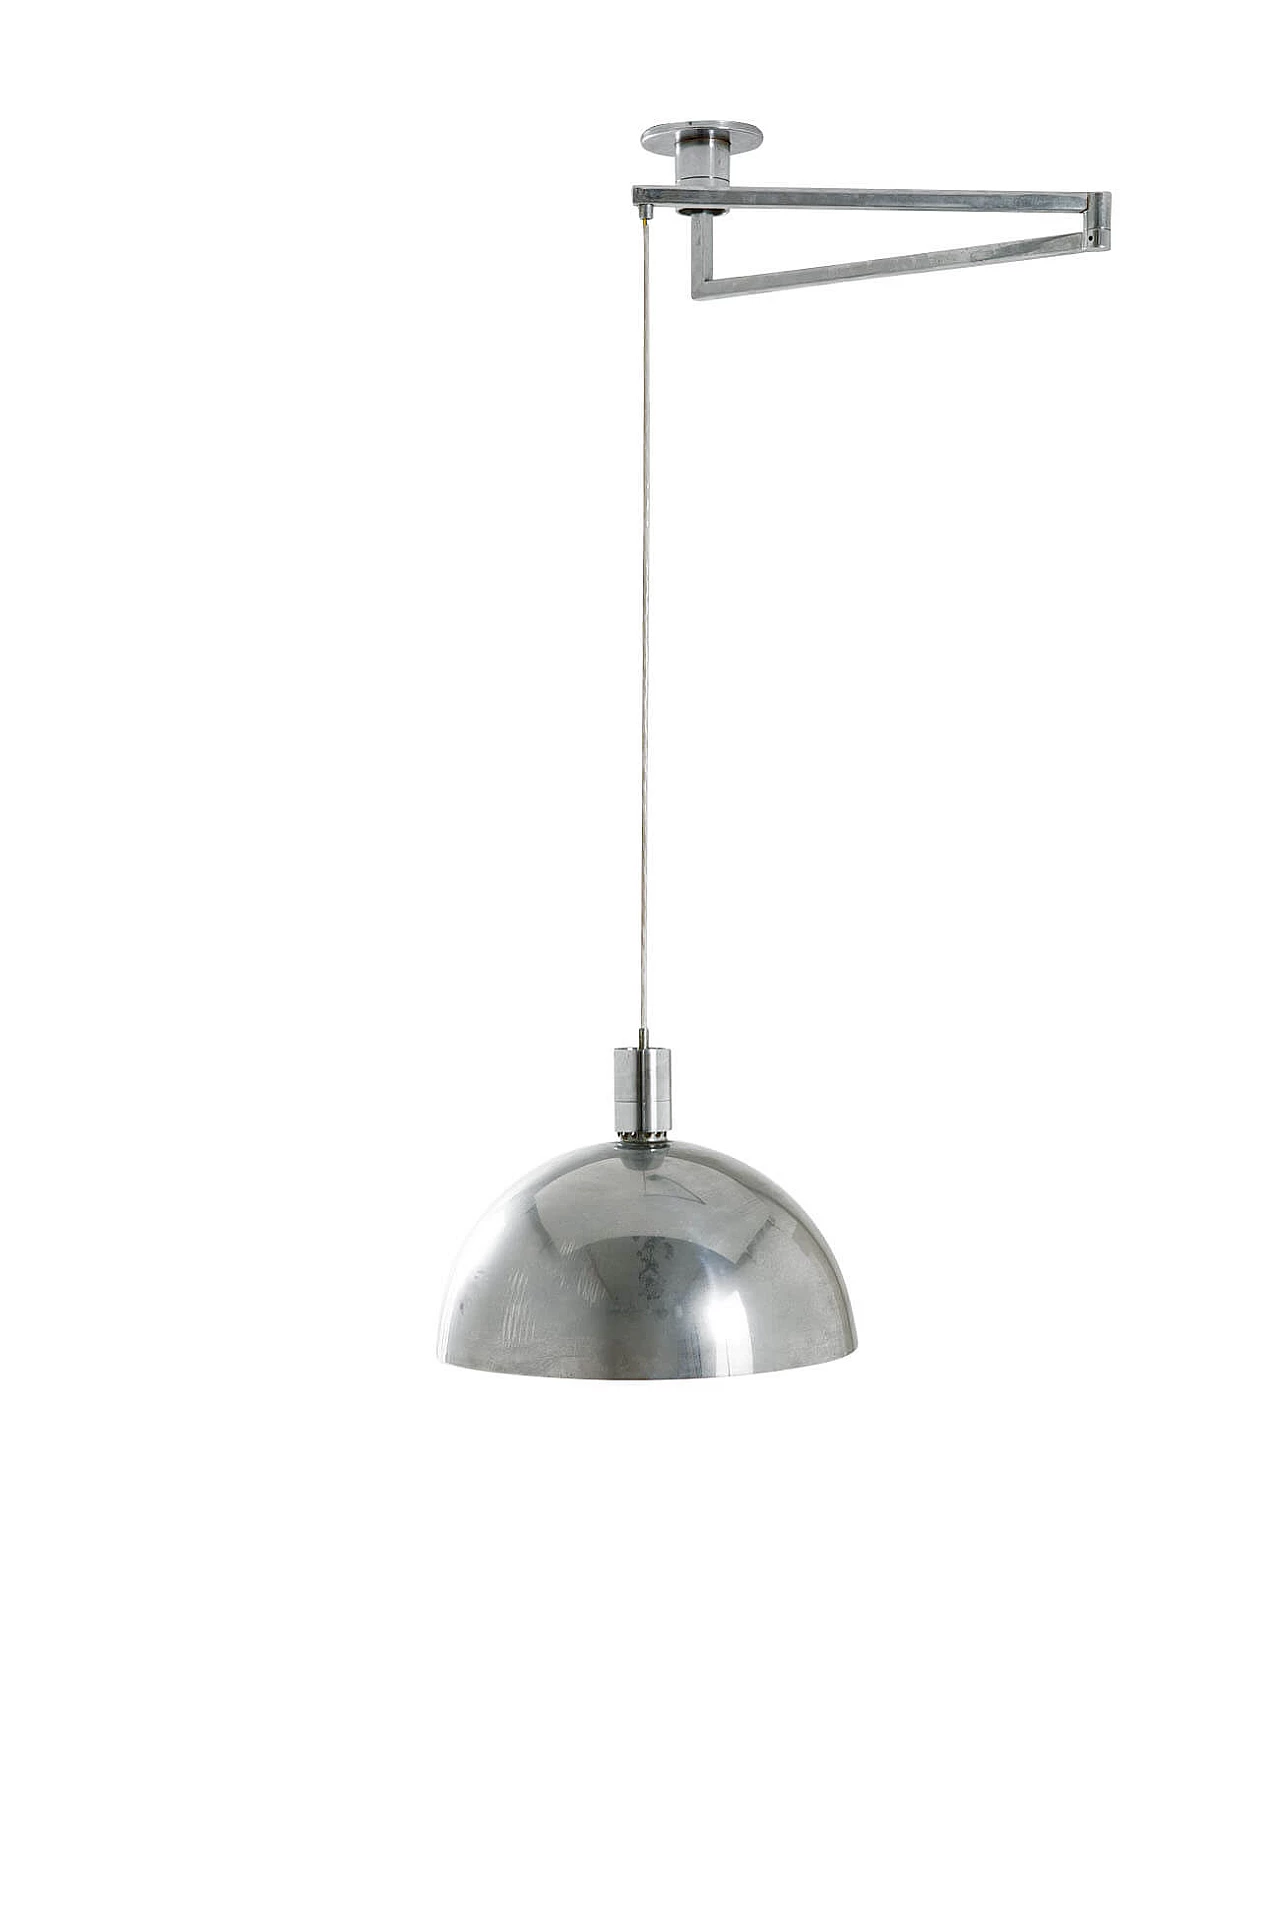 Pendant lamp from the AM/AS series by Franco Albini for Sirrah, 1969 1097959